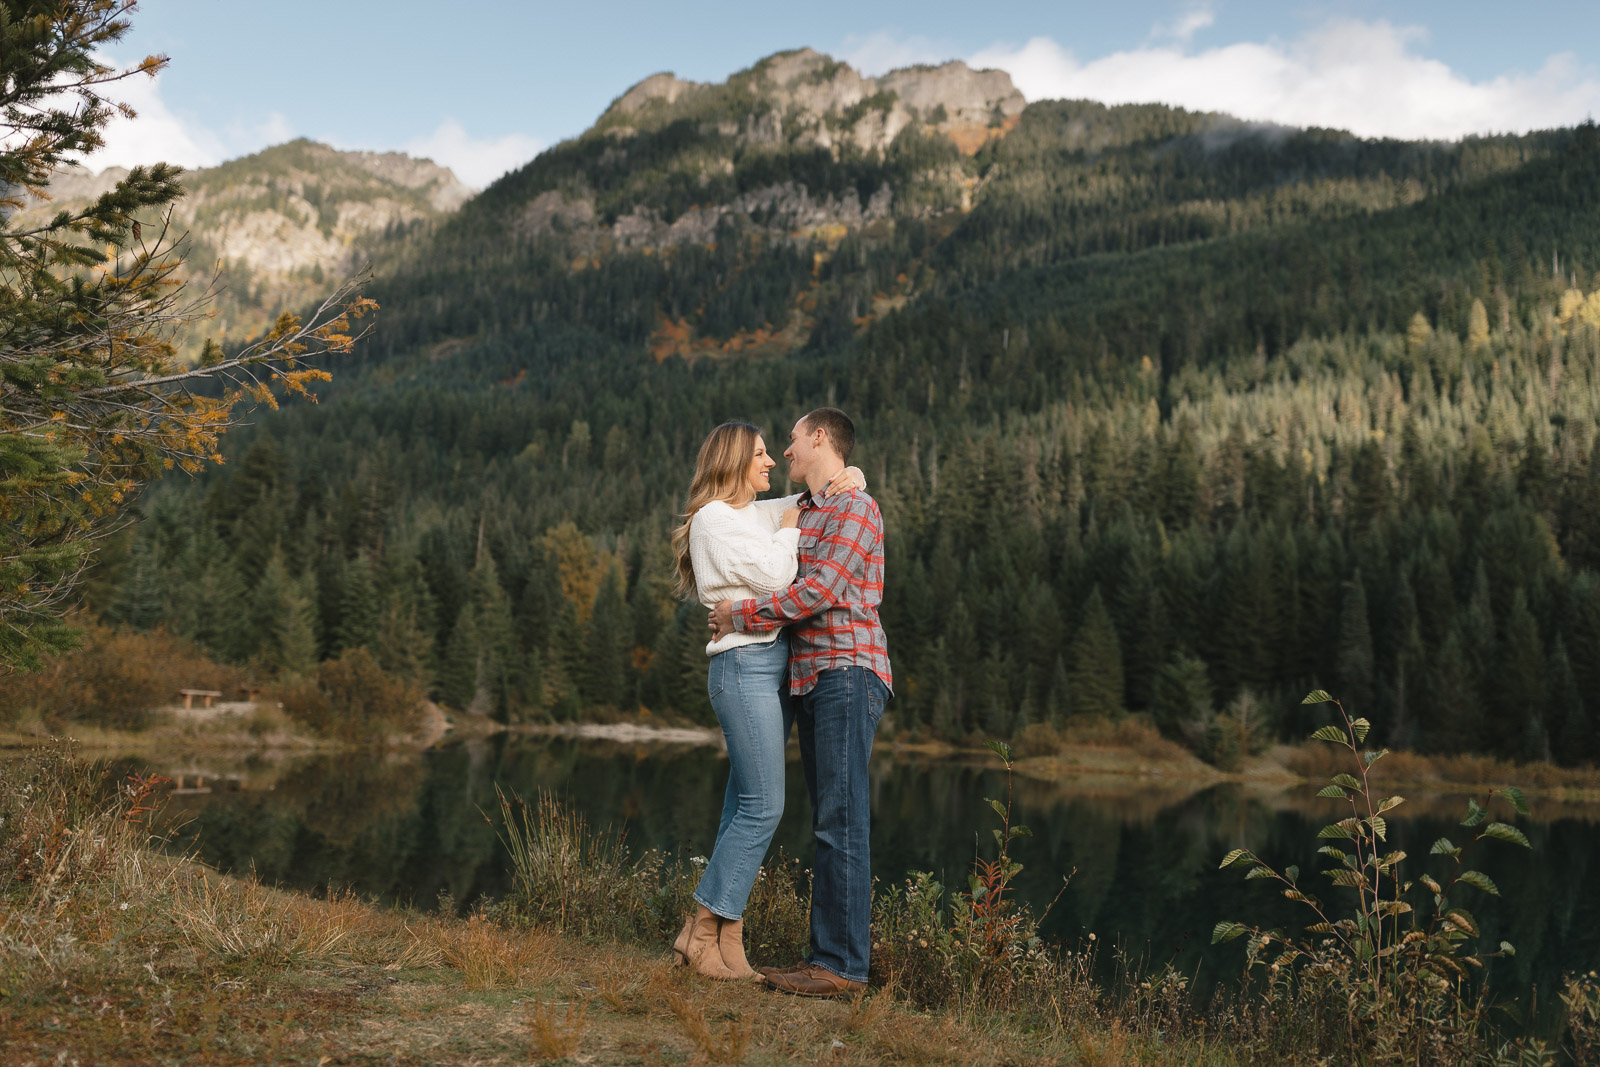 Couple embracing in mountain forest landscape at Gold Creek Pond in Washington State.